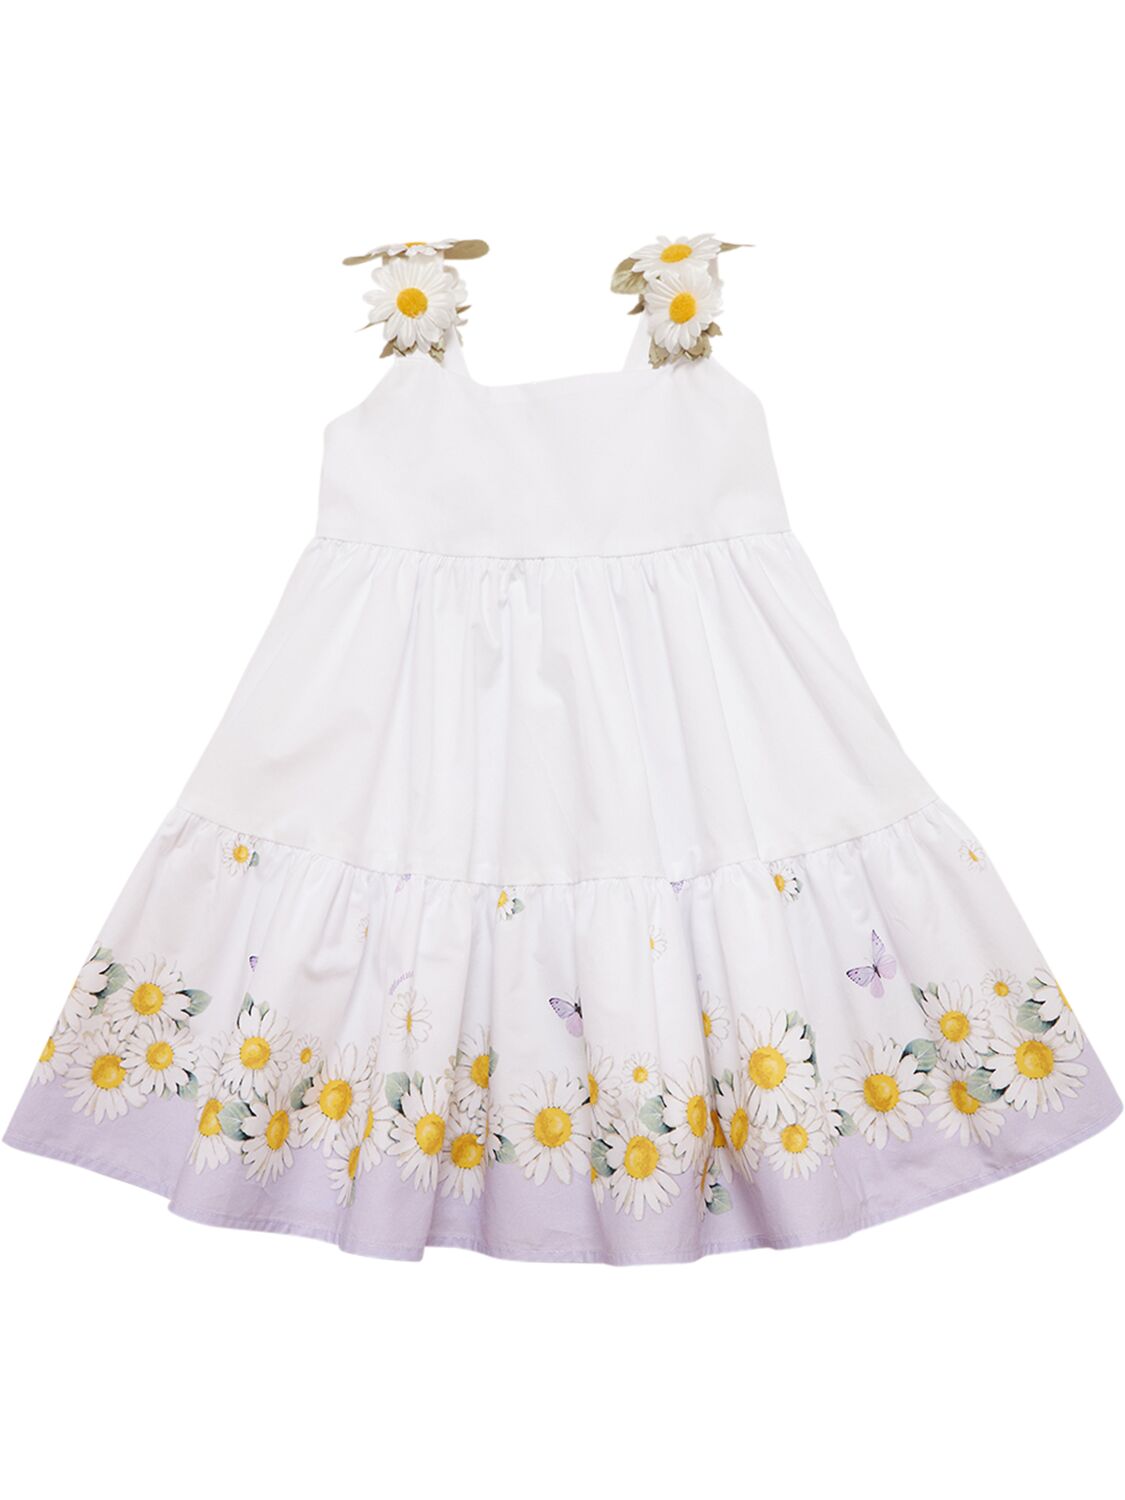 Monnalisa Kids' Embroidered Cotton Dress In White